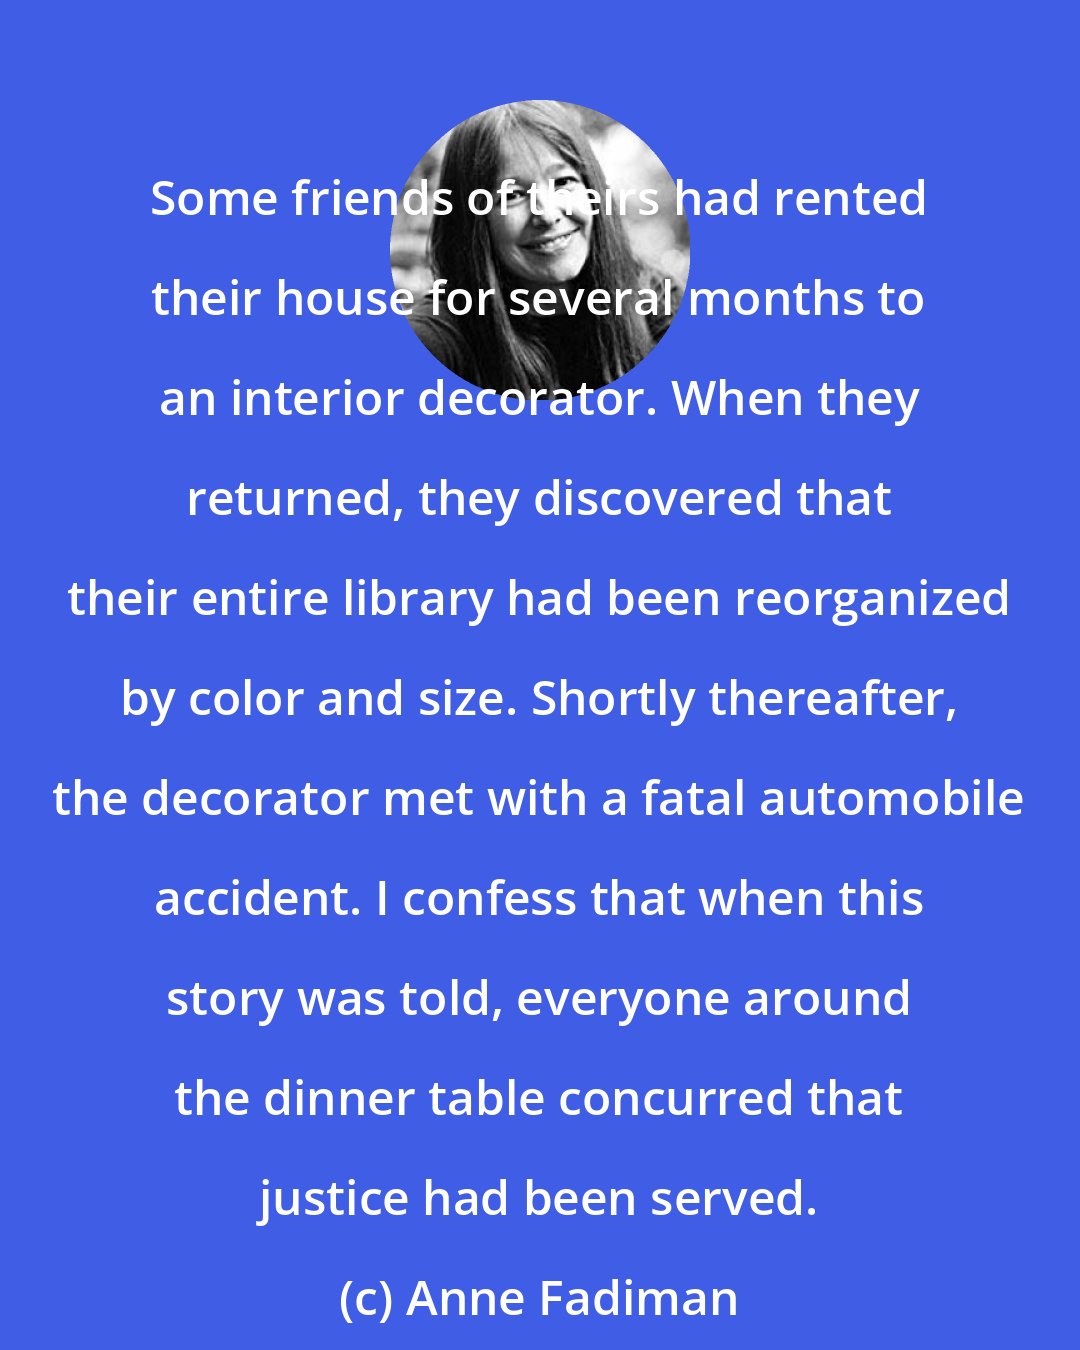 Anne Fadiman: Some friends of theirs had rented their house for several months to an interior decorator. When they returned, they discovered that their entire library had been reorganized by color and size. Shortly thereafter, the decorator met with a fatal automobile accident. I confess that when this story was told, everyone around the dinner table concurred that justice had been served.